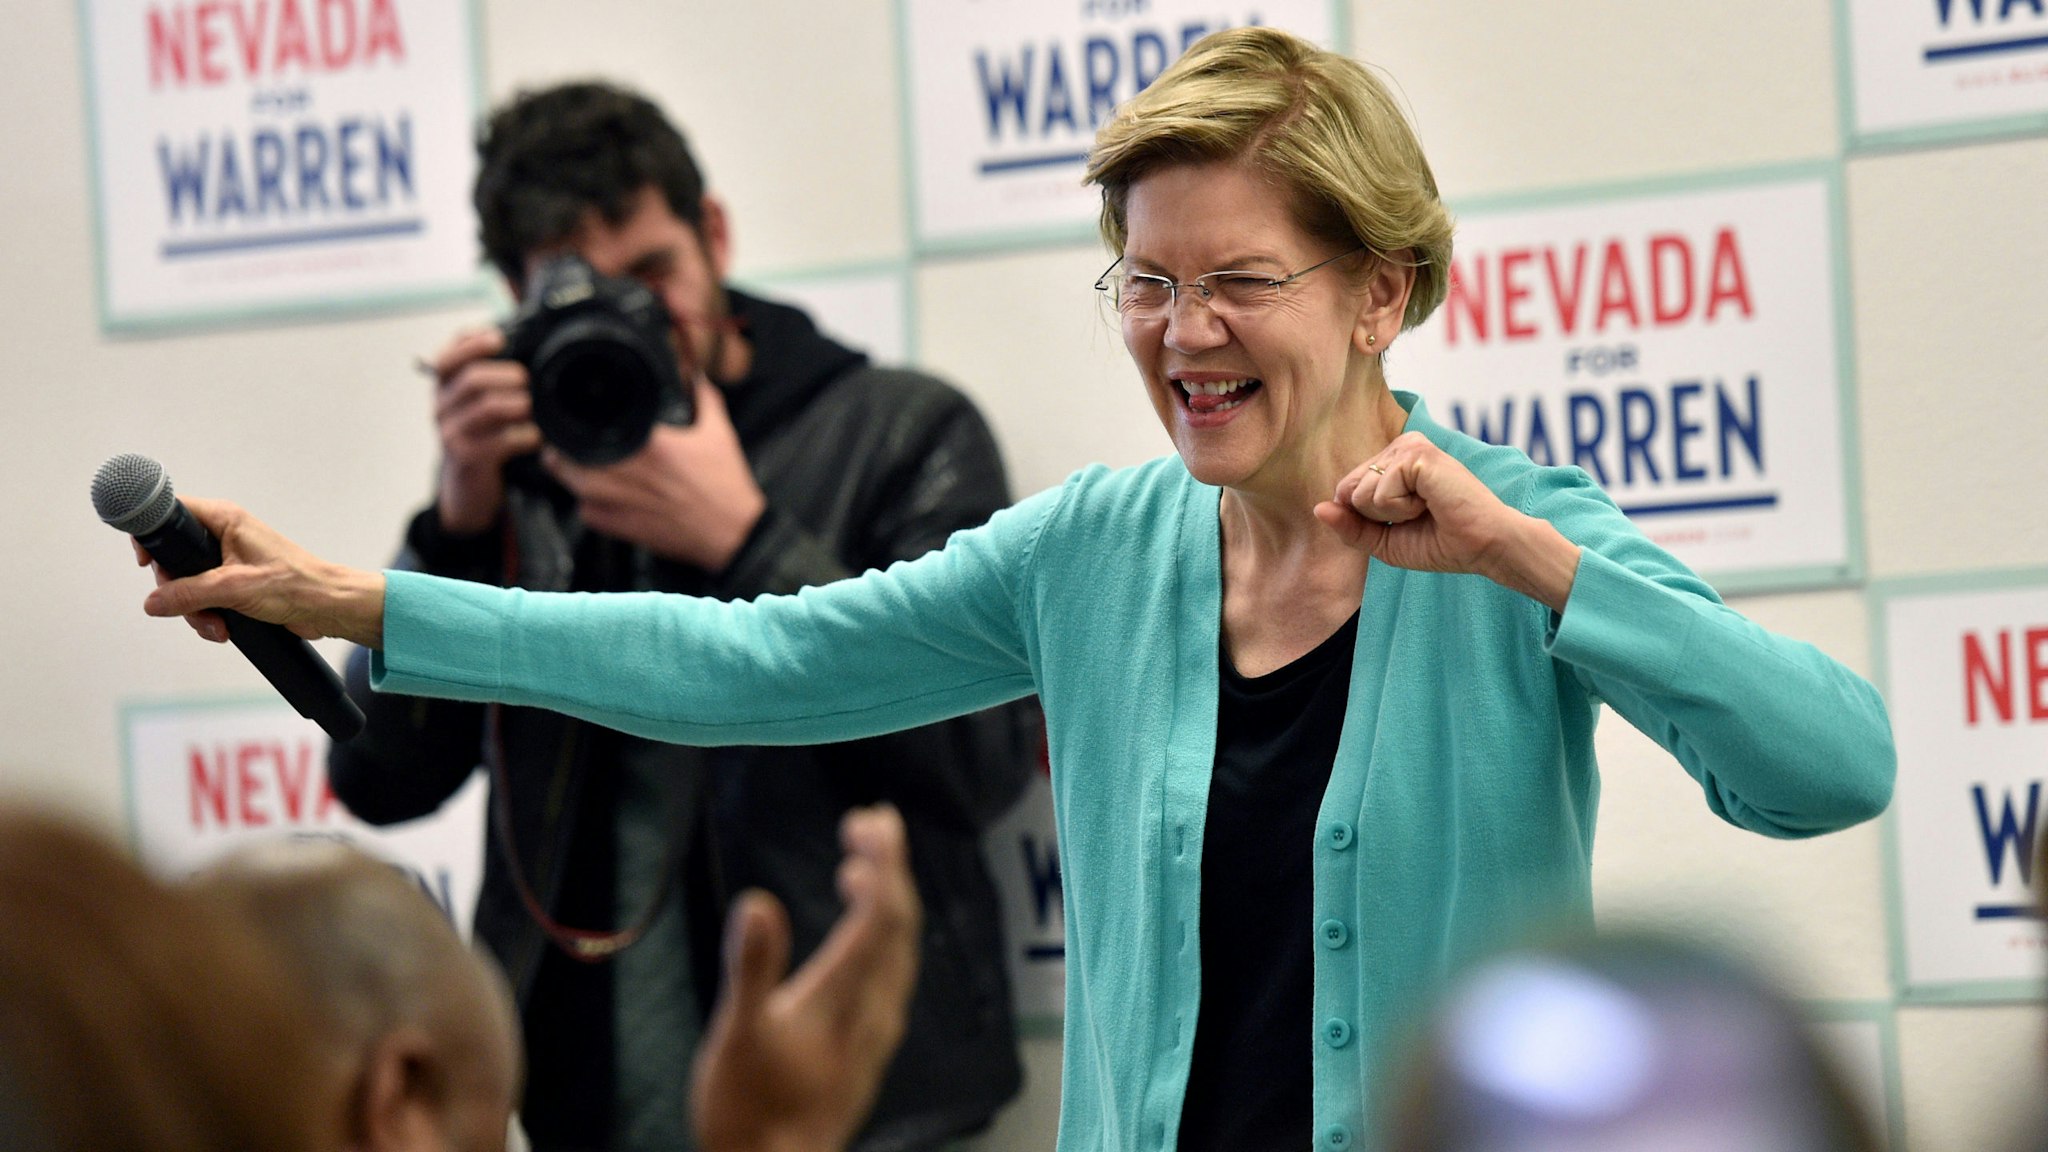 NORTH LAS VEGAS, NEVADA - FEBRUARY 20: Democratic presidential candidate Sen. Elizabeth Warren (D-MA) speaks at a canvass kickoff event at one of her campaign offices on February 20, 2020 in North Las Vegas, Nevada. Nevada Democrats will hold their presidential caucuses on February 22, the third nominating contest in the presidential primary season.